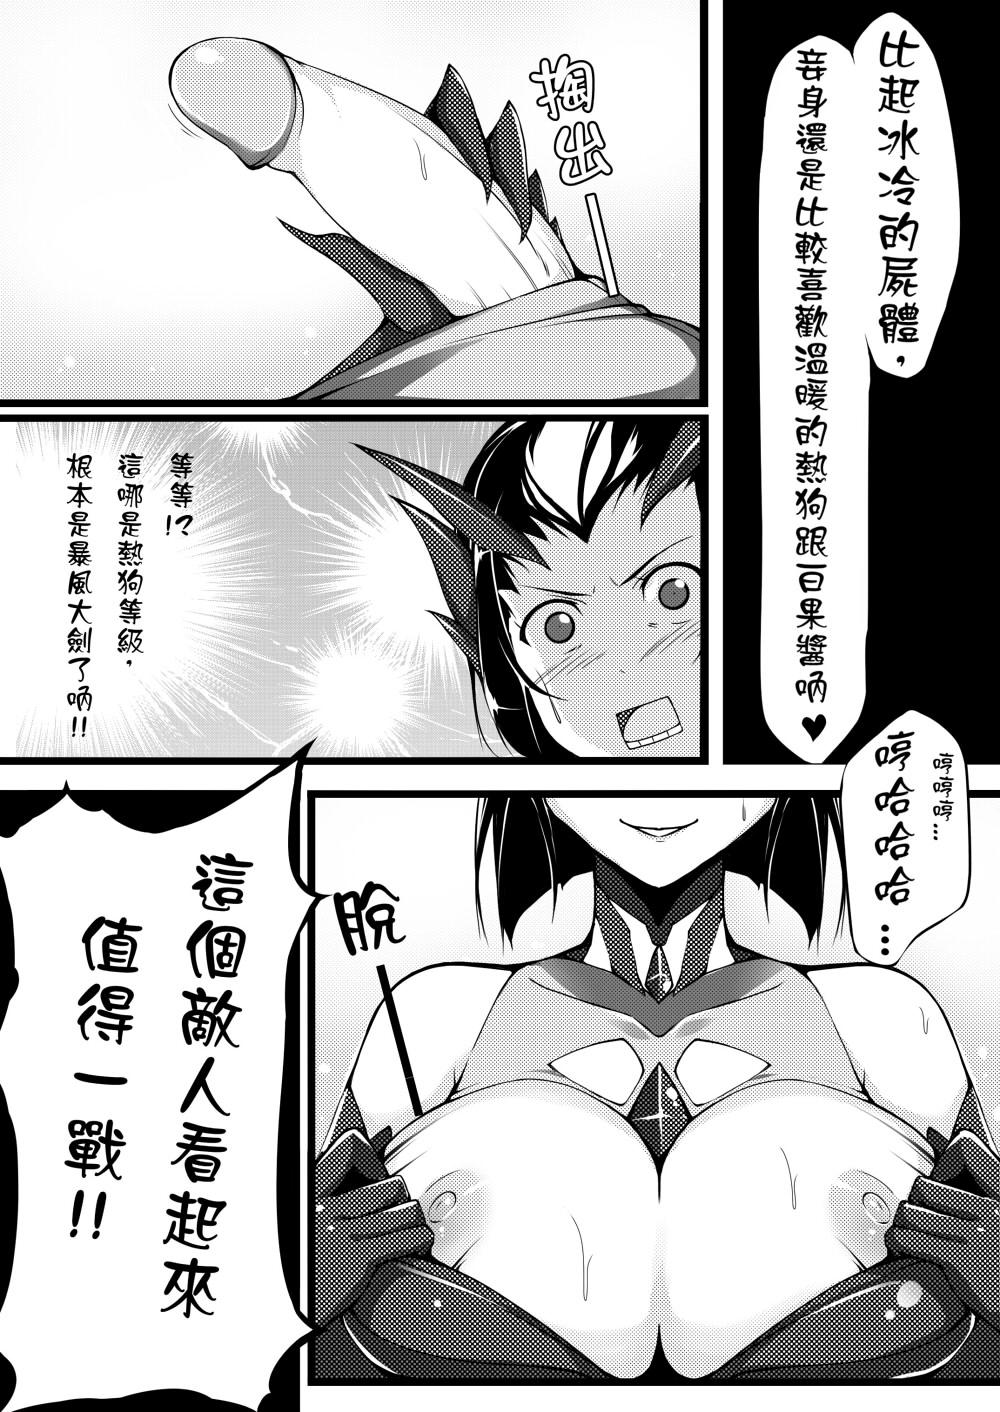 Nice Tits 蜘蛛王女-Darkness - League of legends Analsex - Page 4